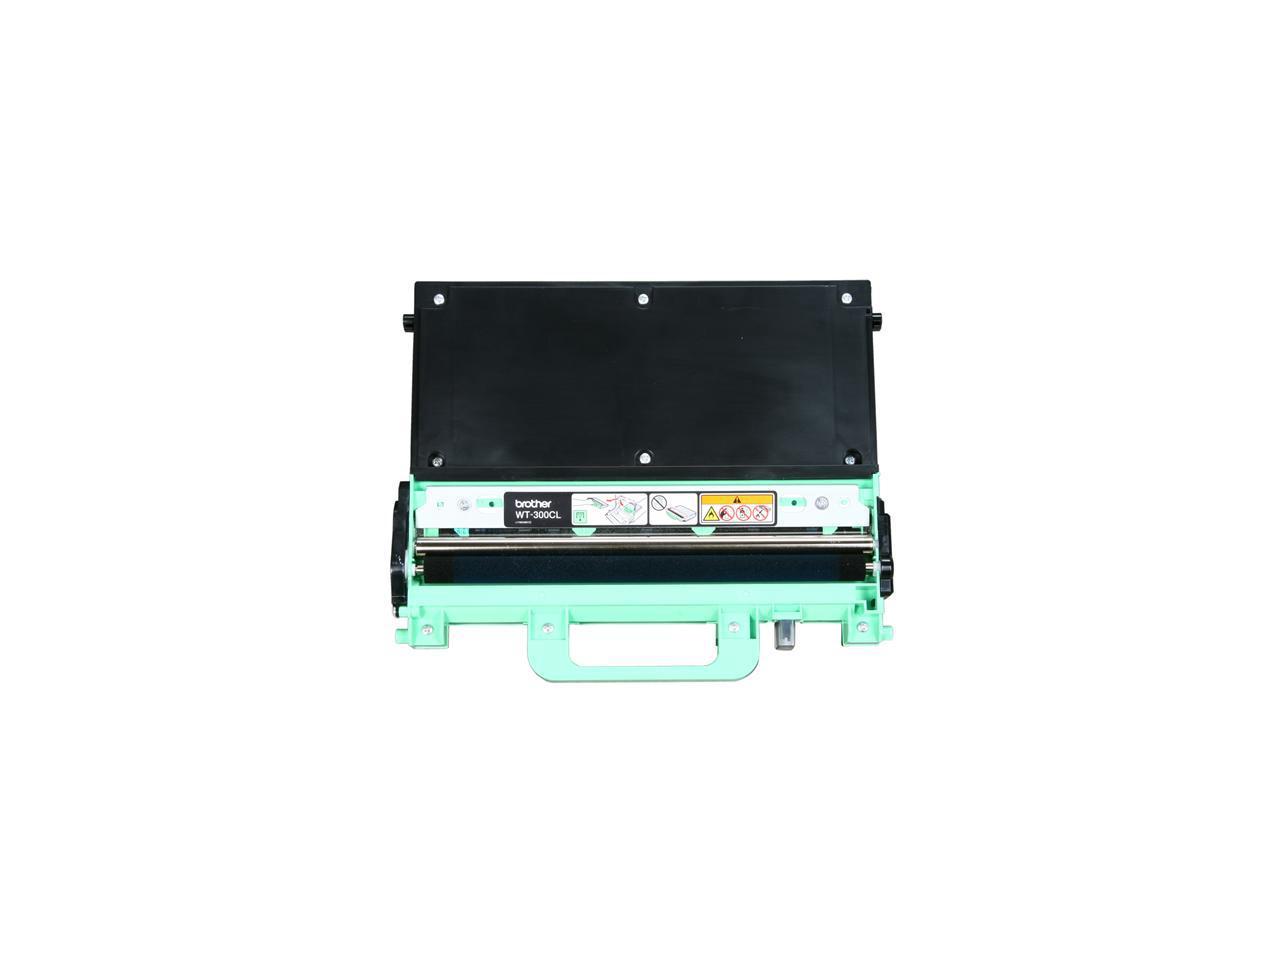 Brother WT300CL Waste Toner Box